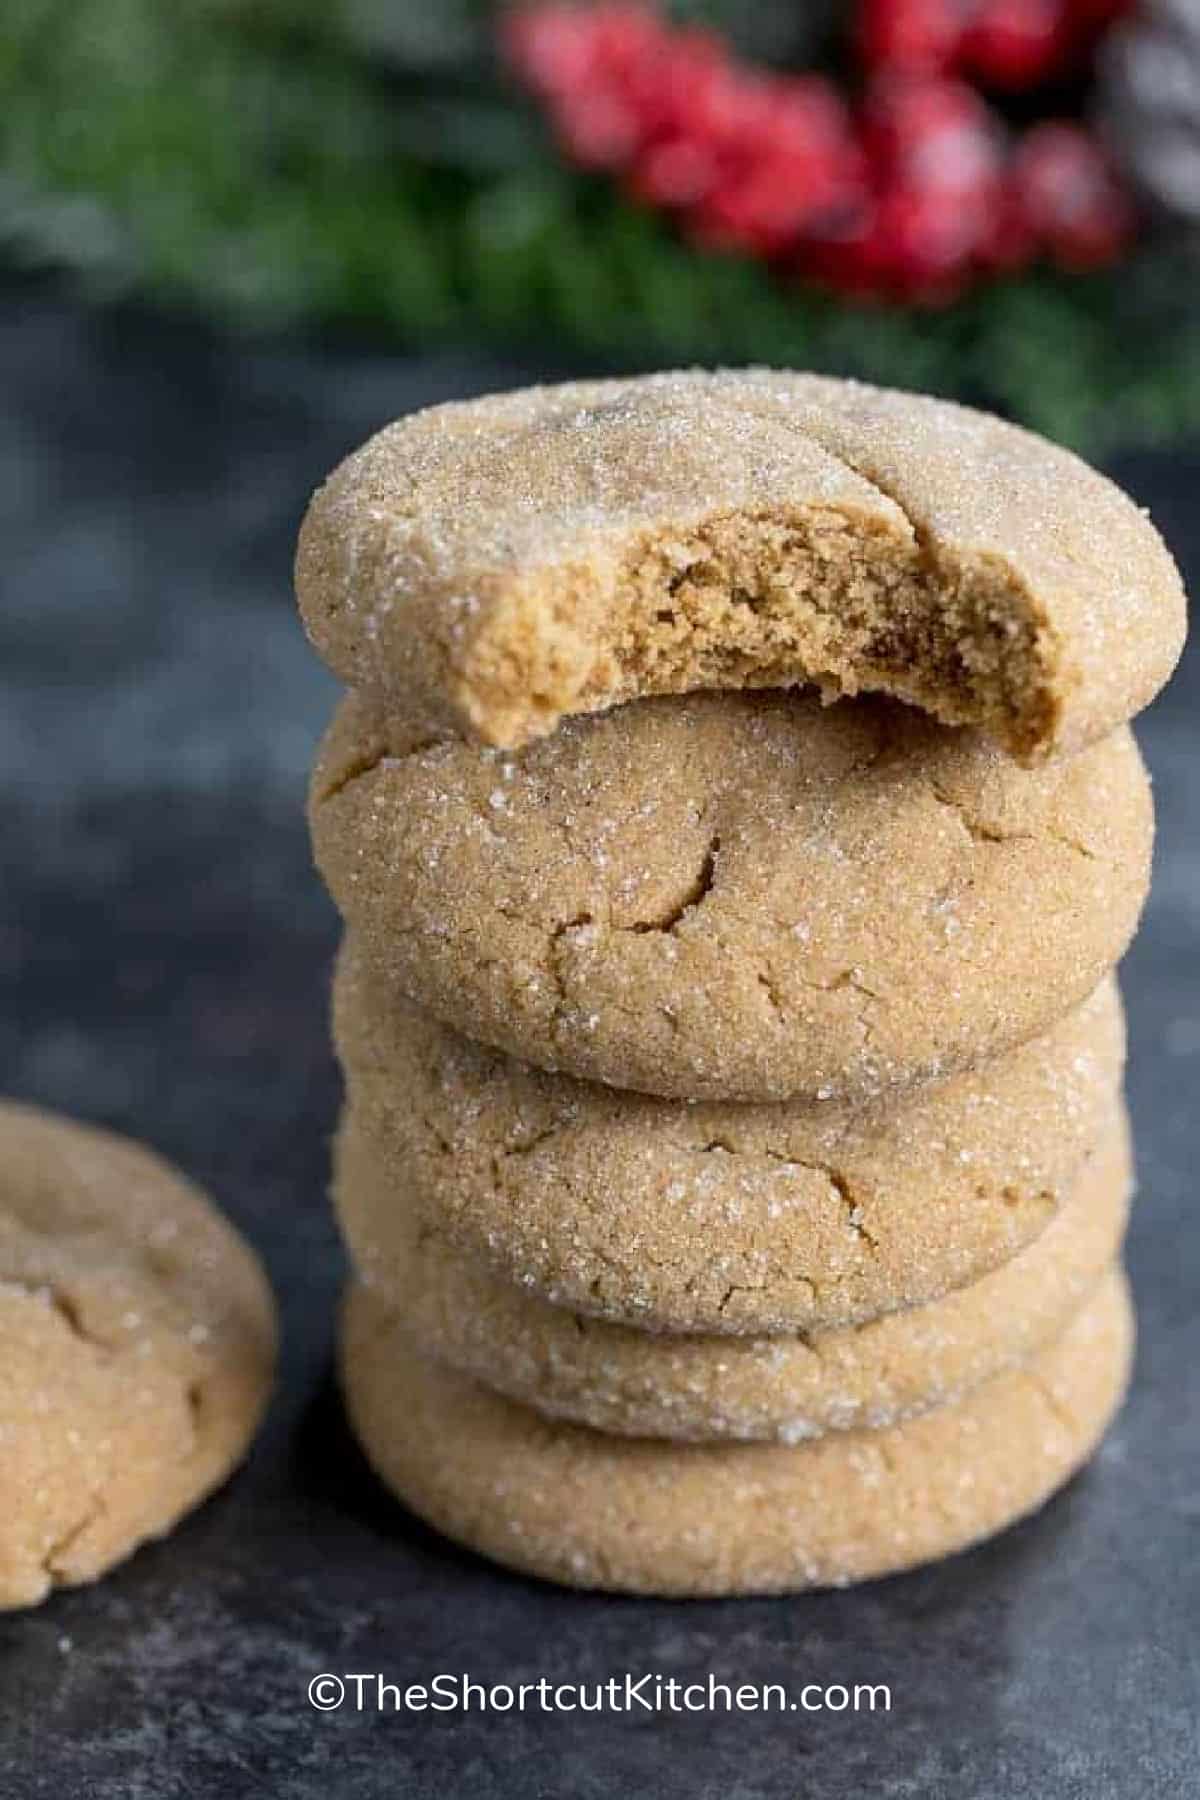 stack of molasses cookies with a bite taken out of the top one